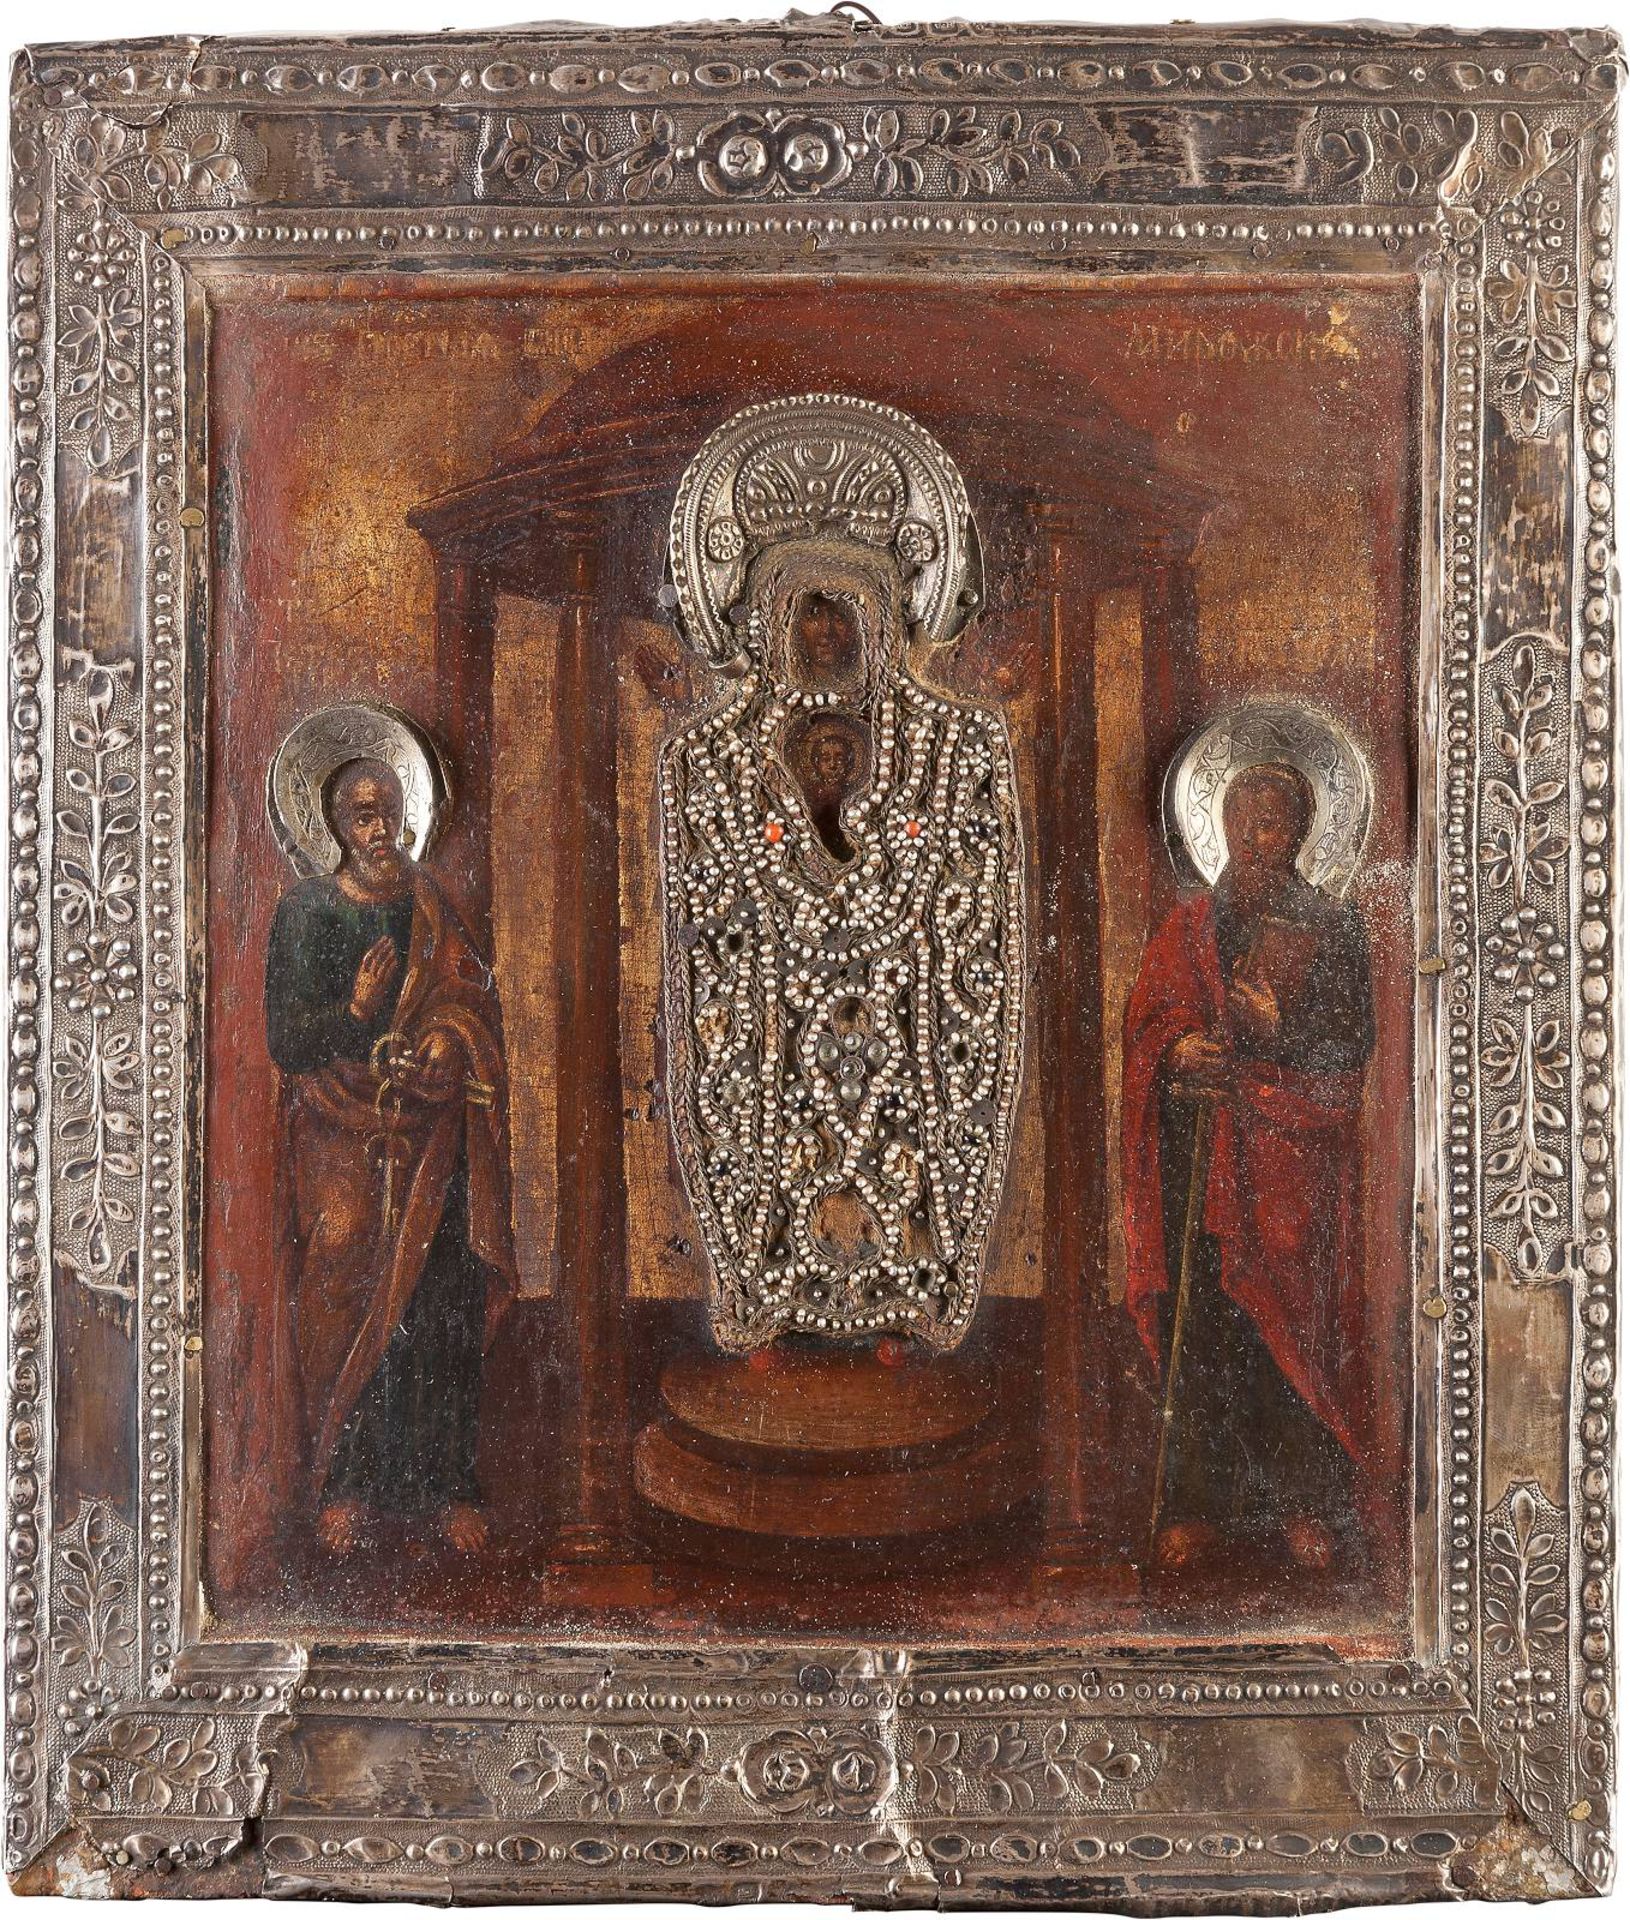 A RARE ICON SHOWING THE MIROZHKAYA MOTHER OF GOD WITH SILVER BASMARussian, late 18th century (icon),